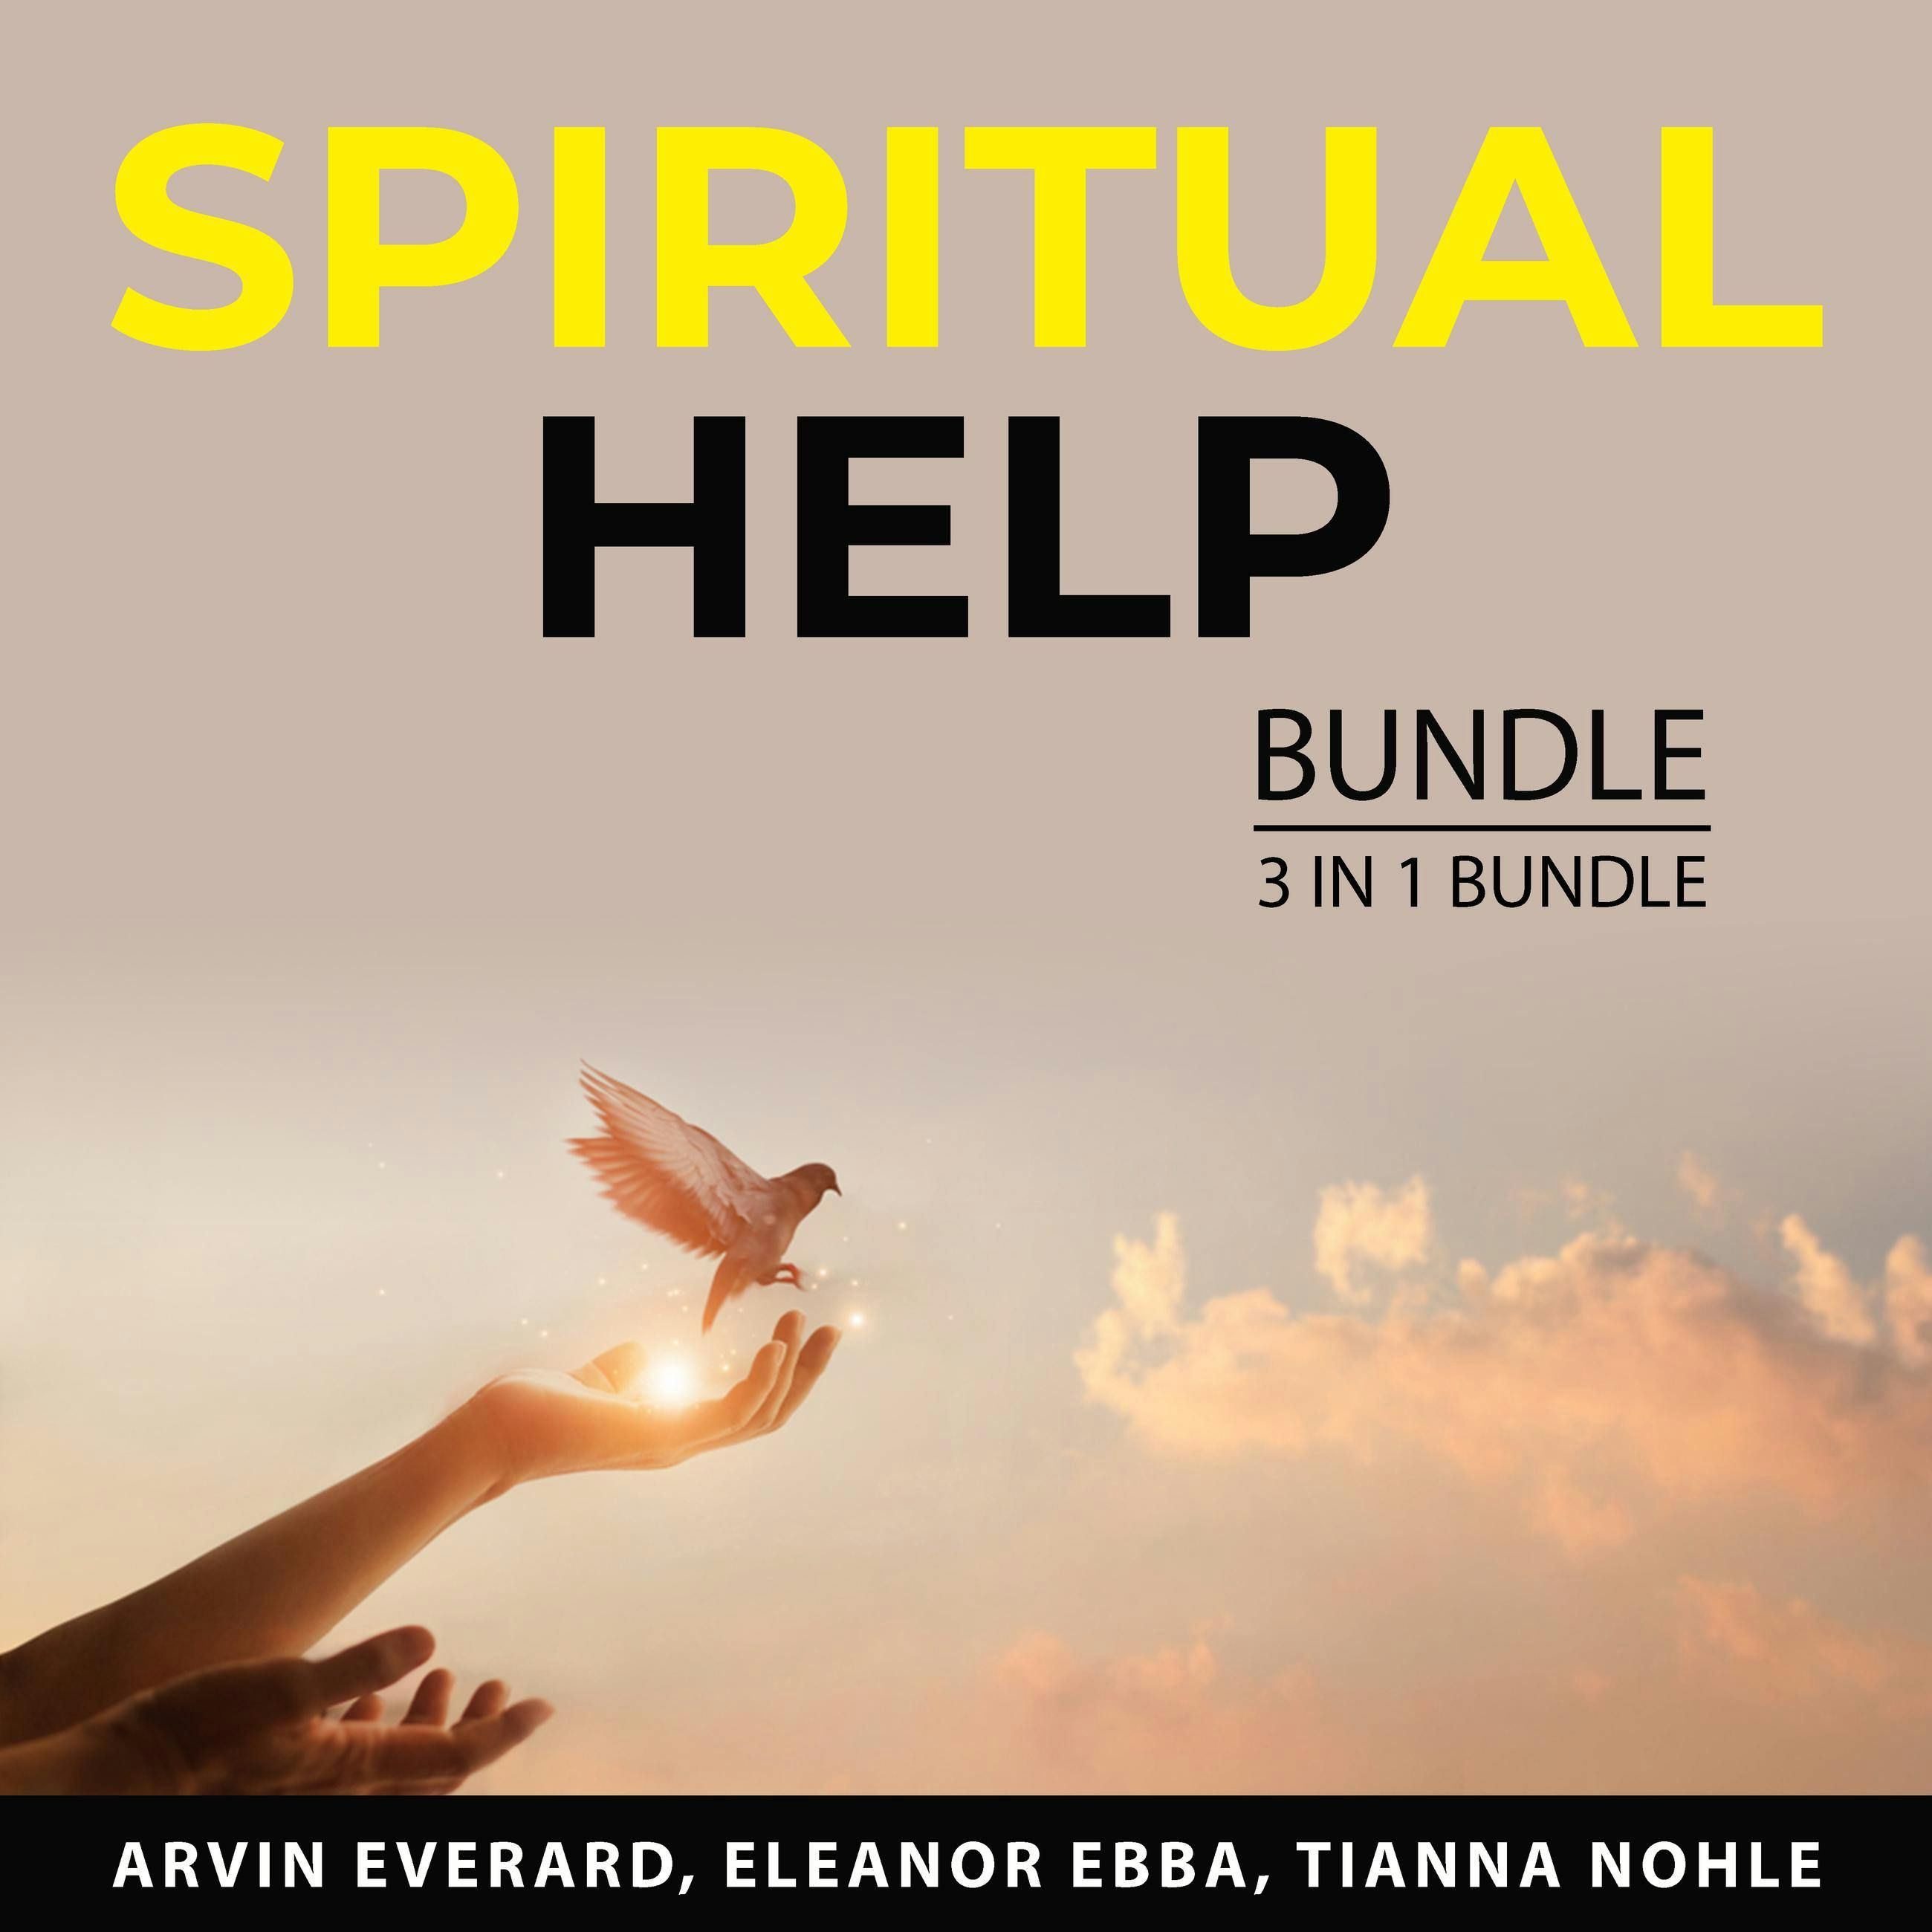 Spiritual Help Bundle, 3 in 1 Bundle: The Power of Affirmative Prayers, Living by Faith, Spiritual Resolution - undefined